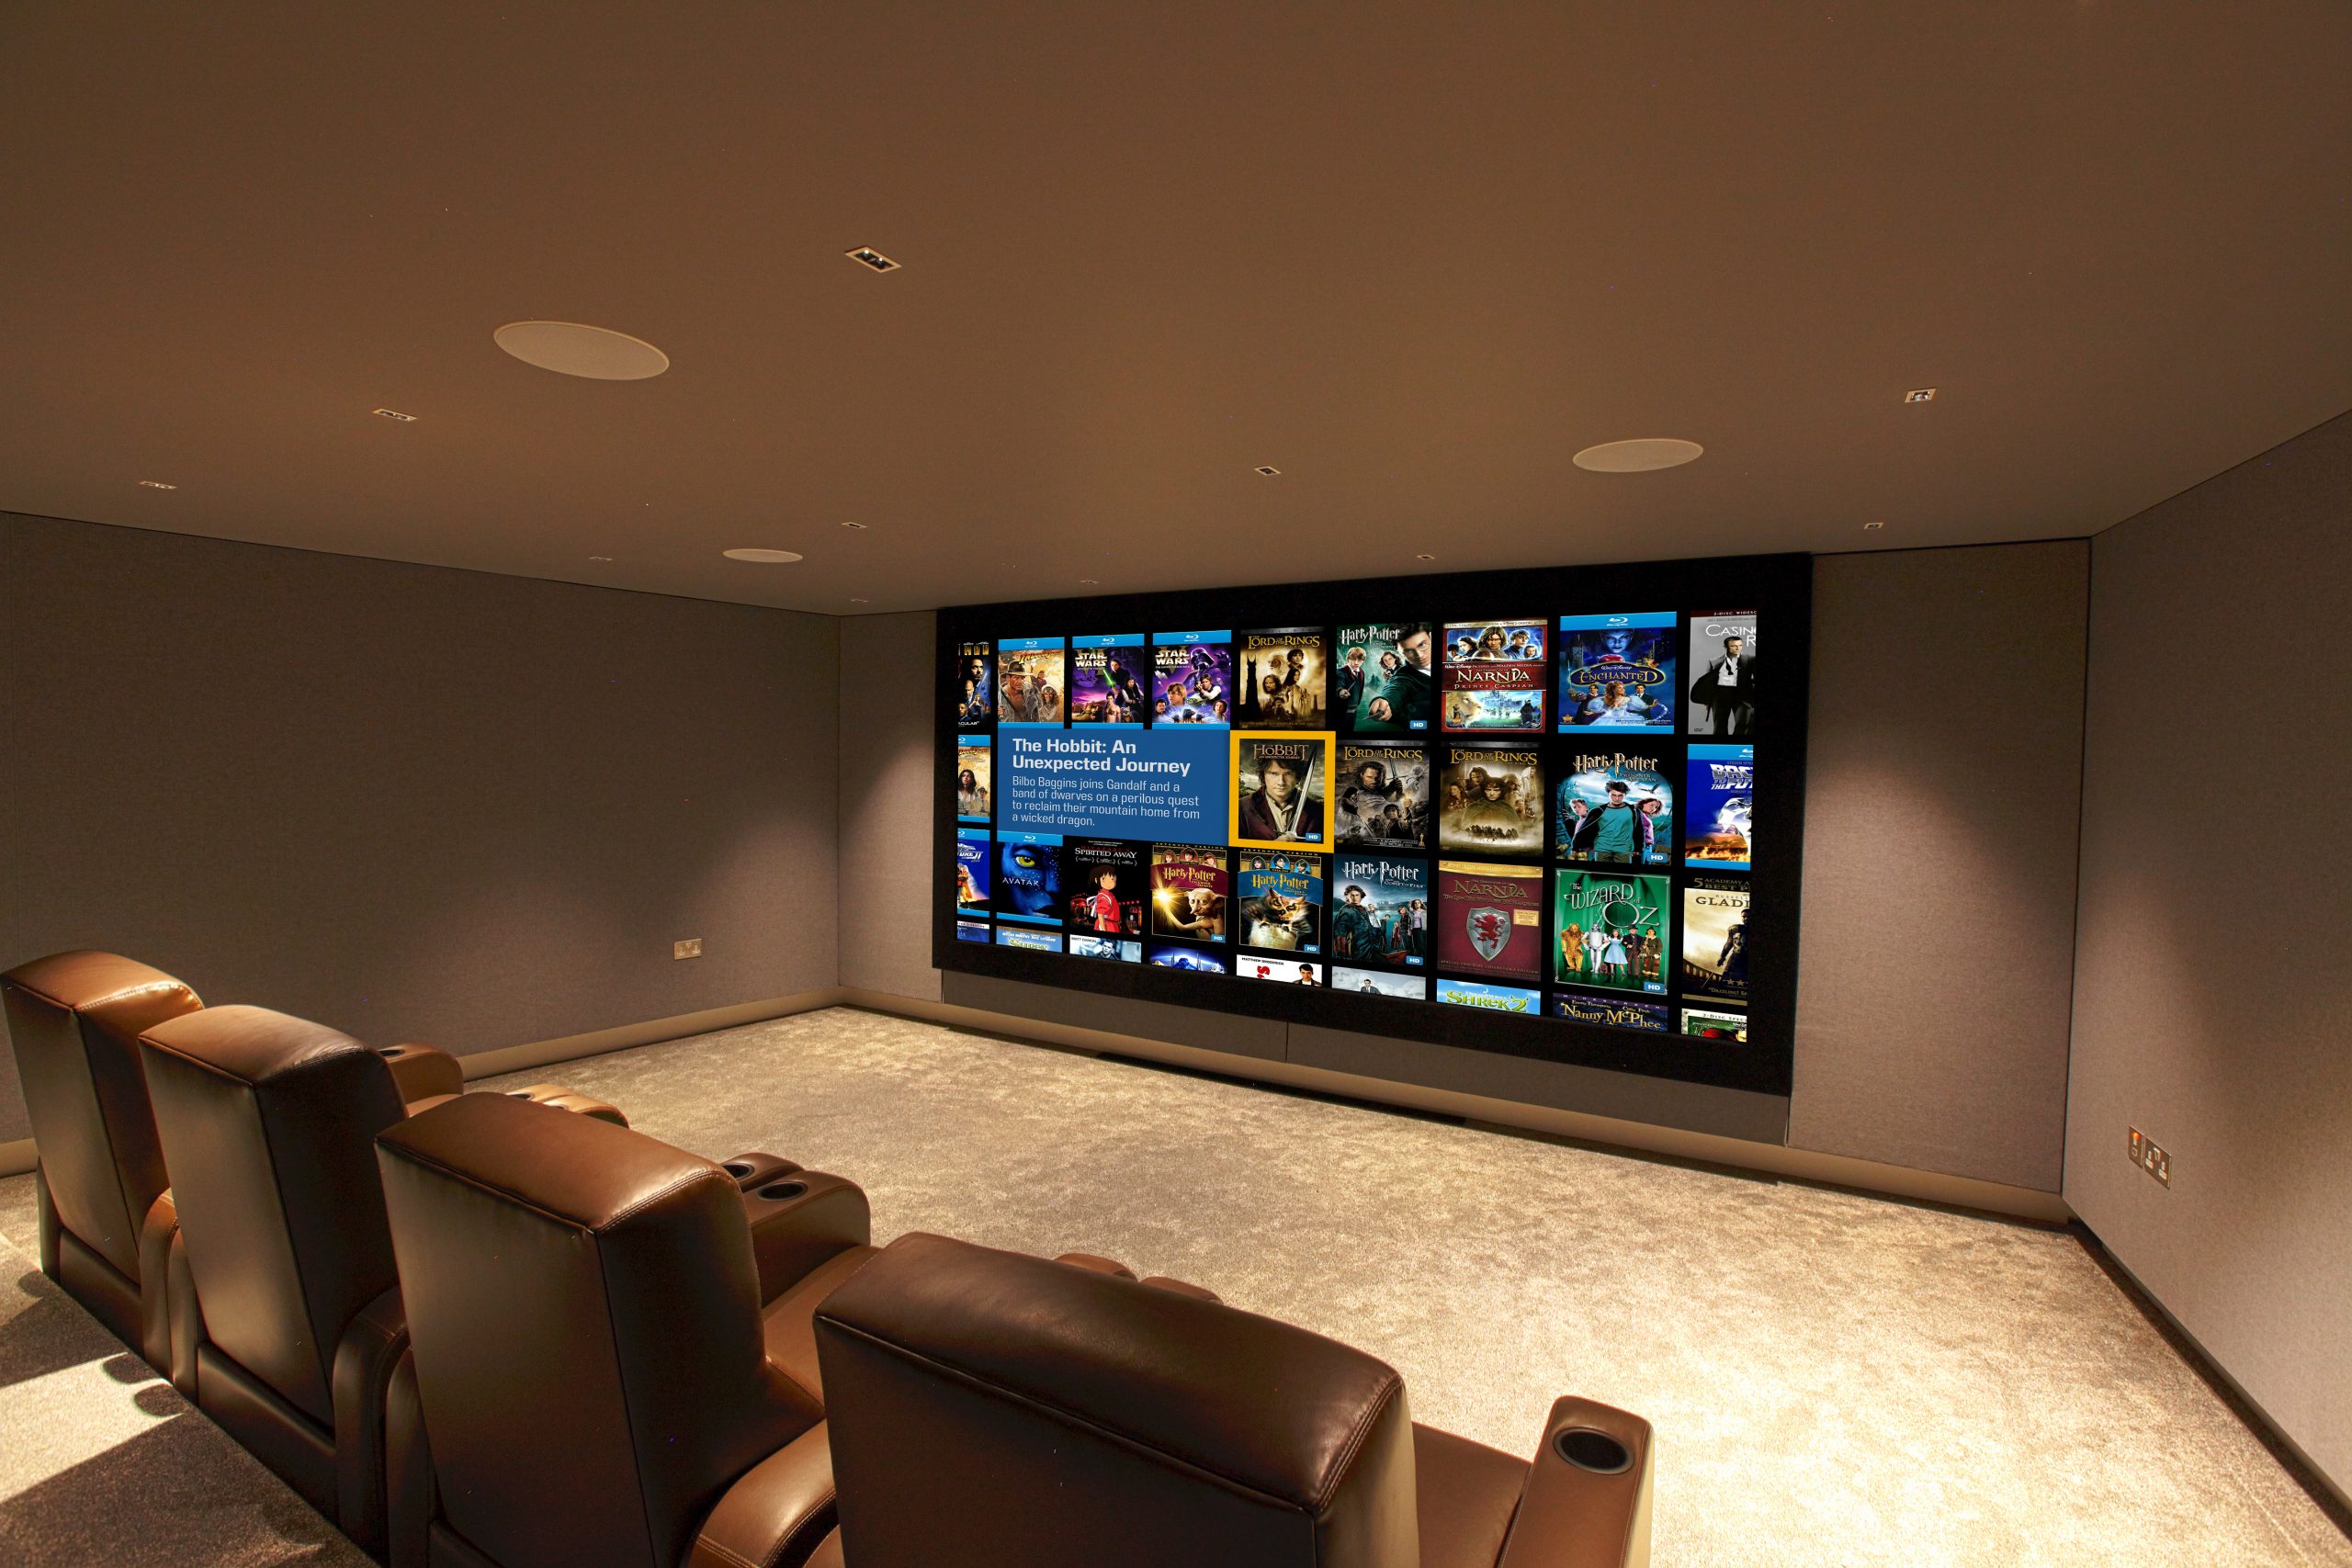 Immersive home cinema, looking at screen from rear right. Shows Fortress seating and Kaleidescape image.